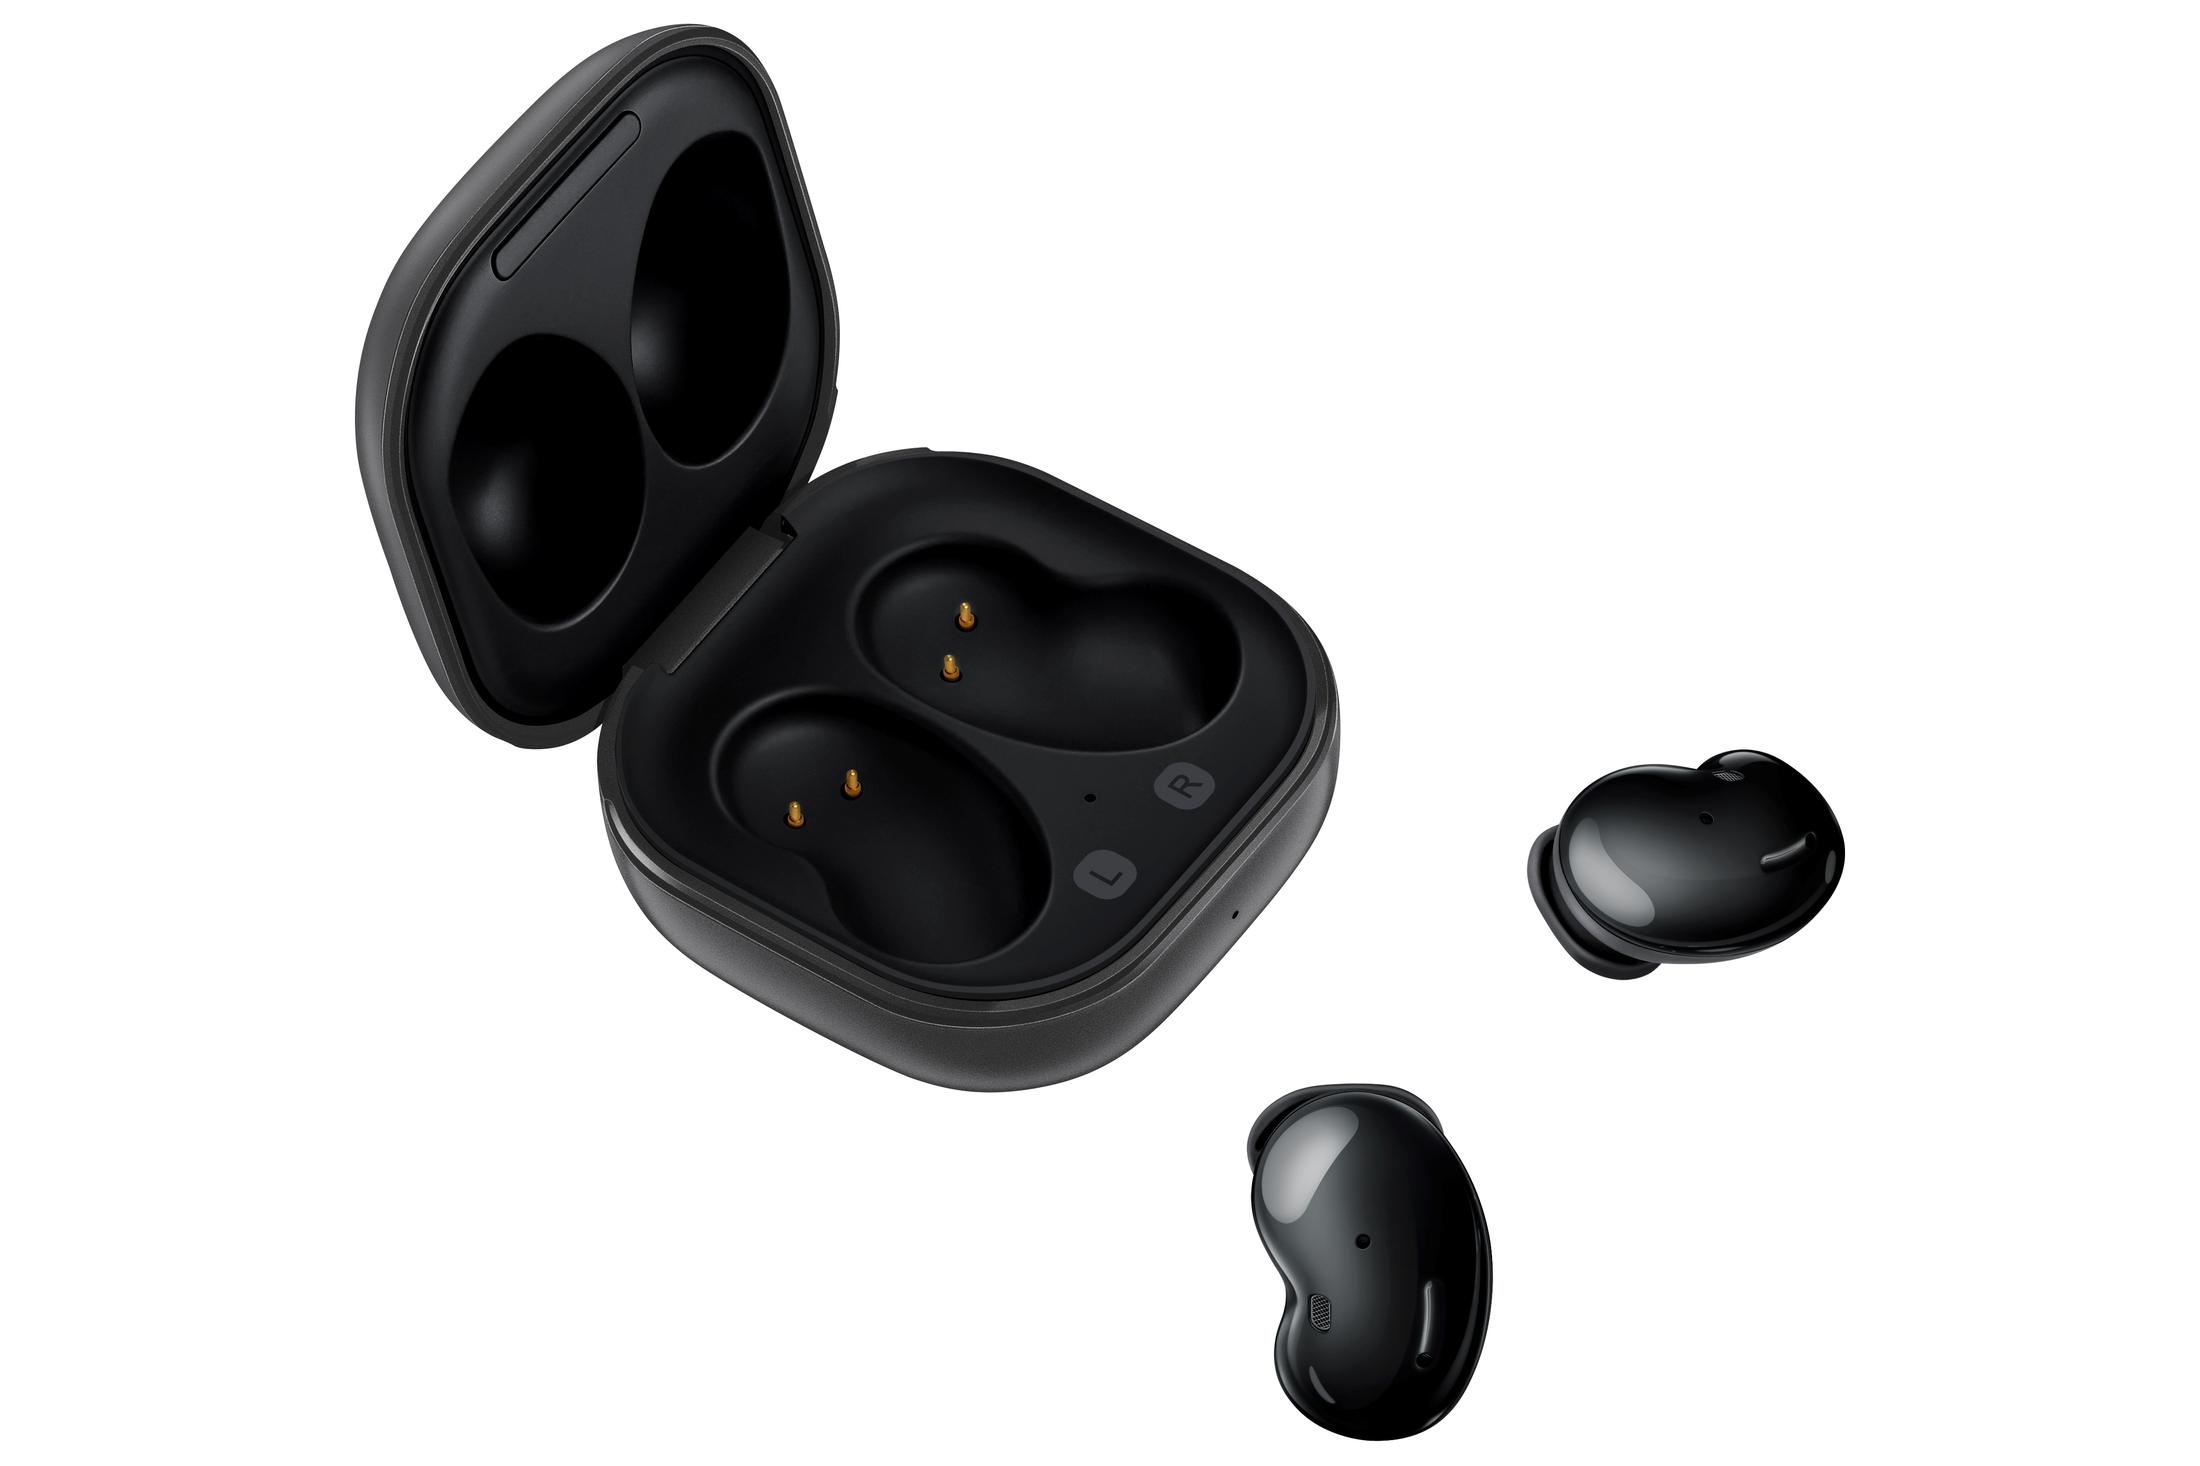 Samsung Galaxy Buds Live Bluetooth Earbuds, Noise Canceling and True Wireless, Onyx Black - image 1 of 12